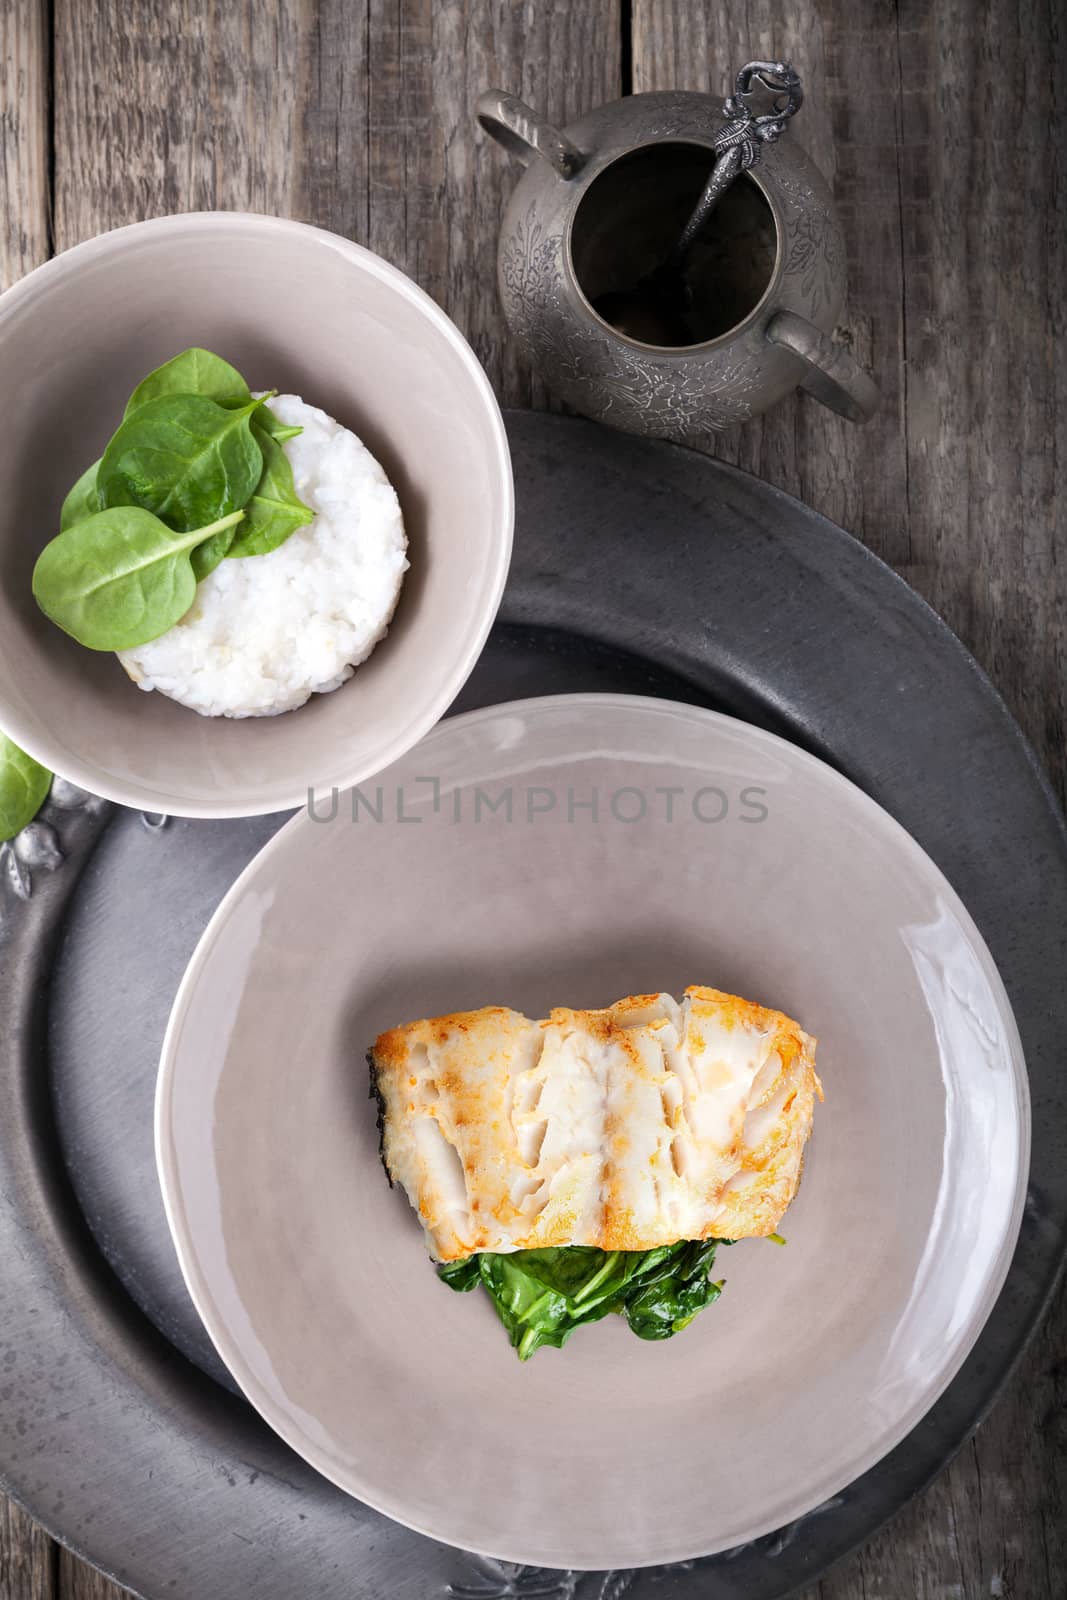 Fried cod fillets and spinach served on a wooden surface